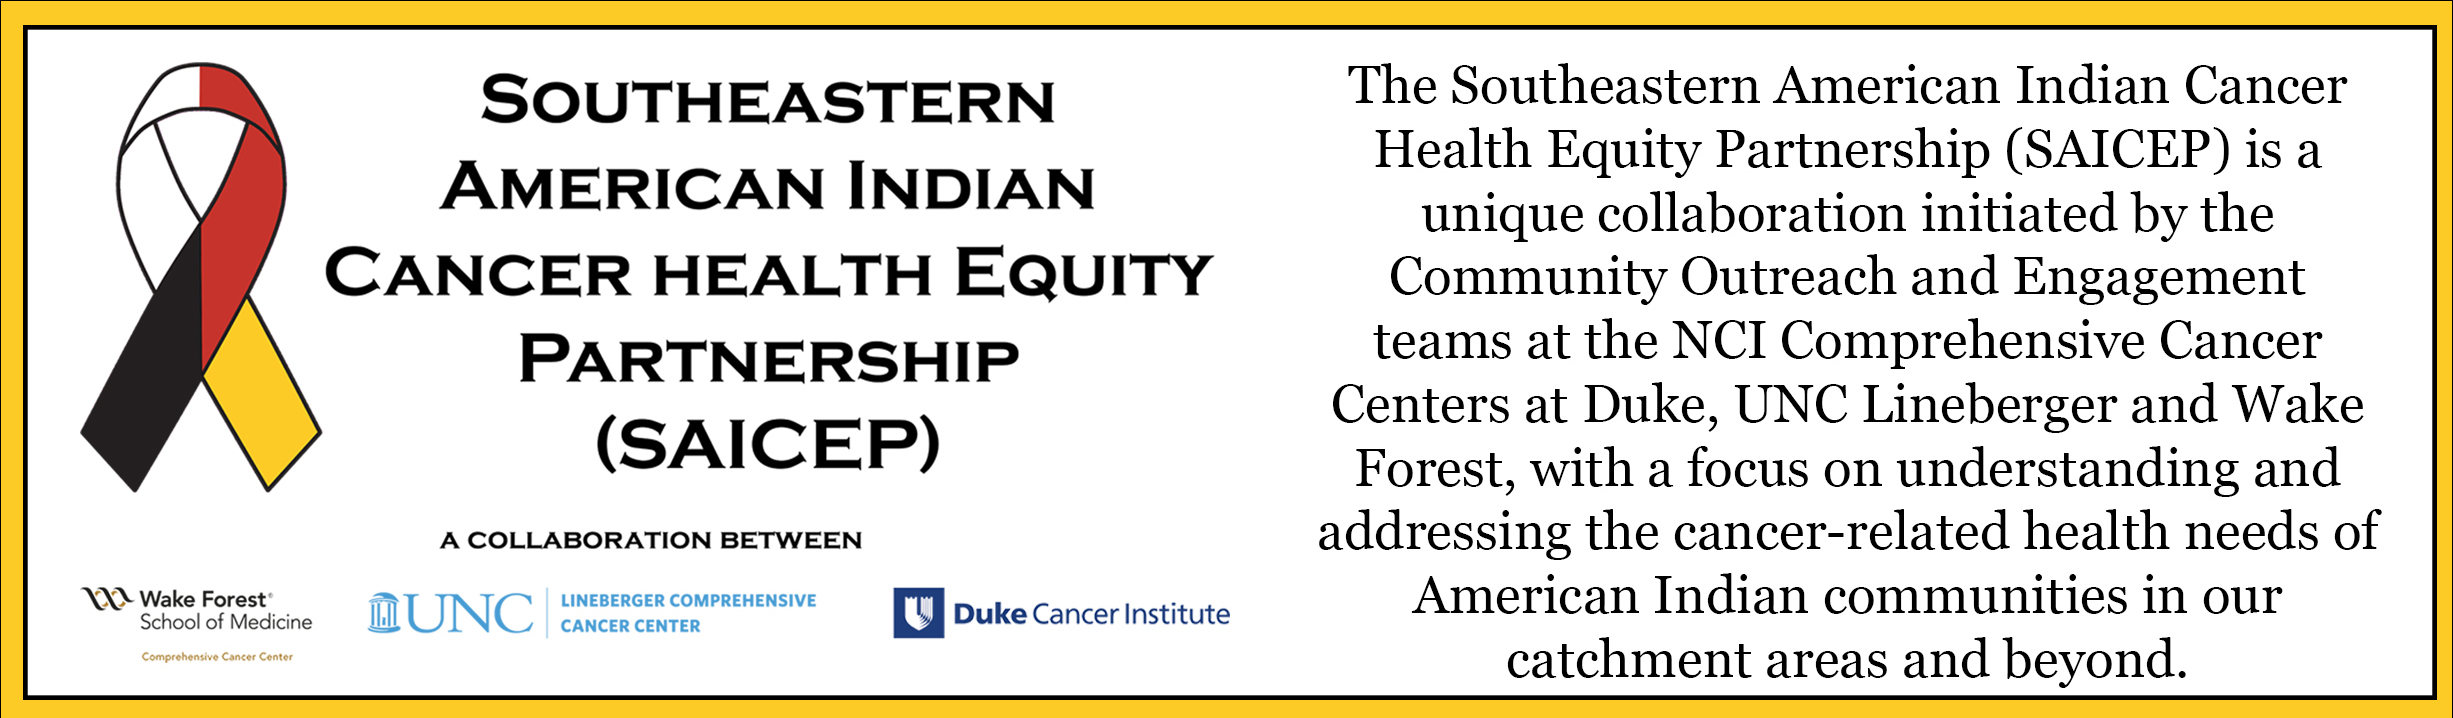 Southeastern American Indian Cancer Health Equity Partnership